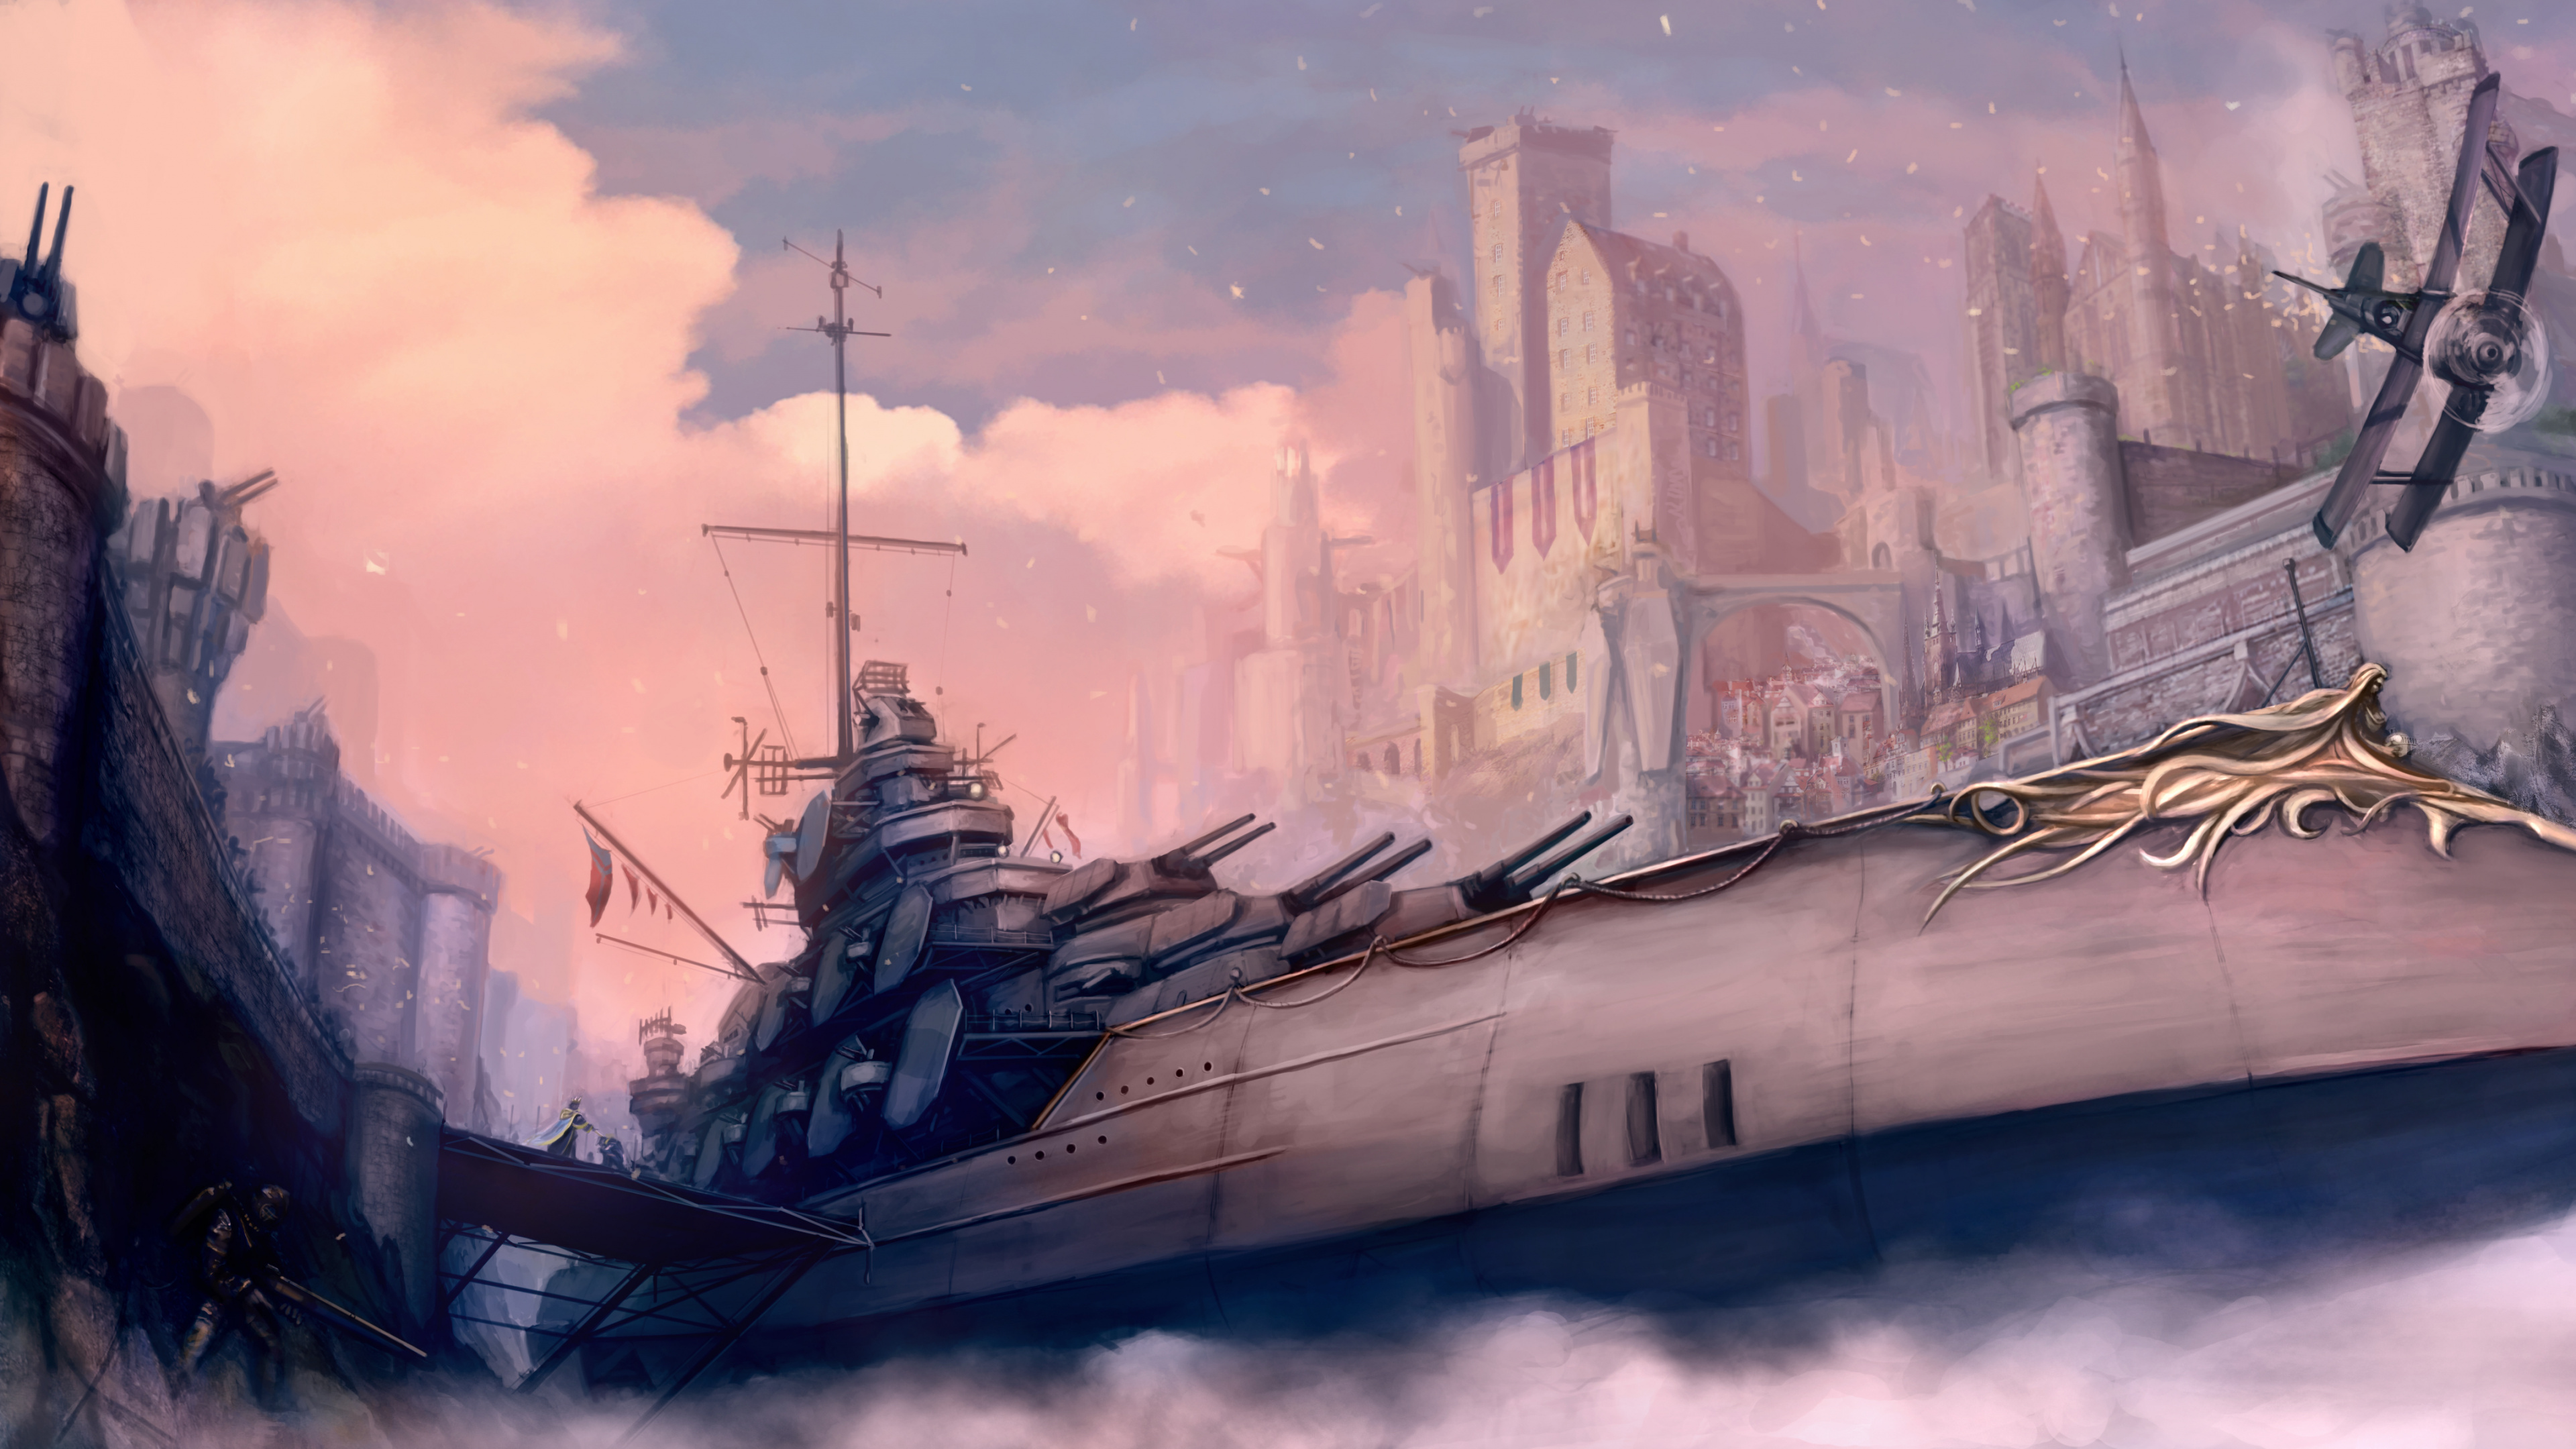 Steampunk, Ship, Airship, Painting, Watercolor Paint. Wallpaper in 3840x2160 Resolution